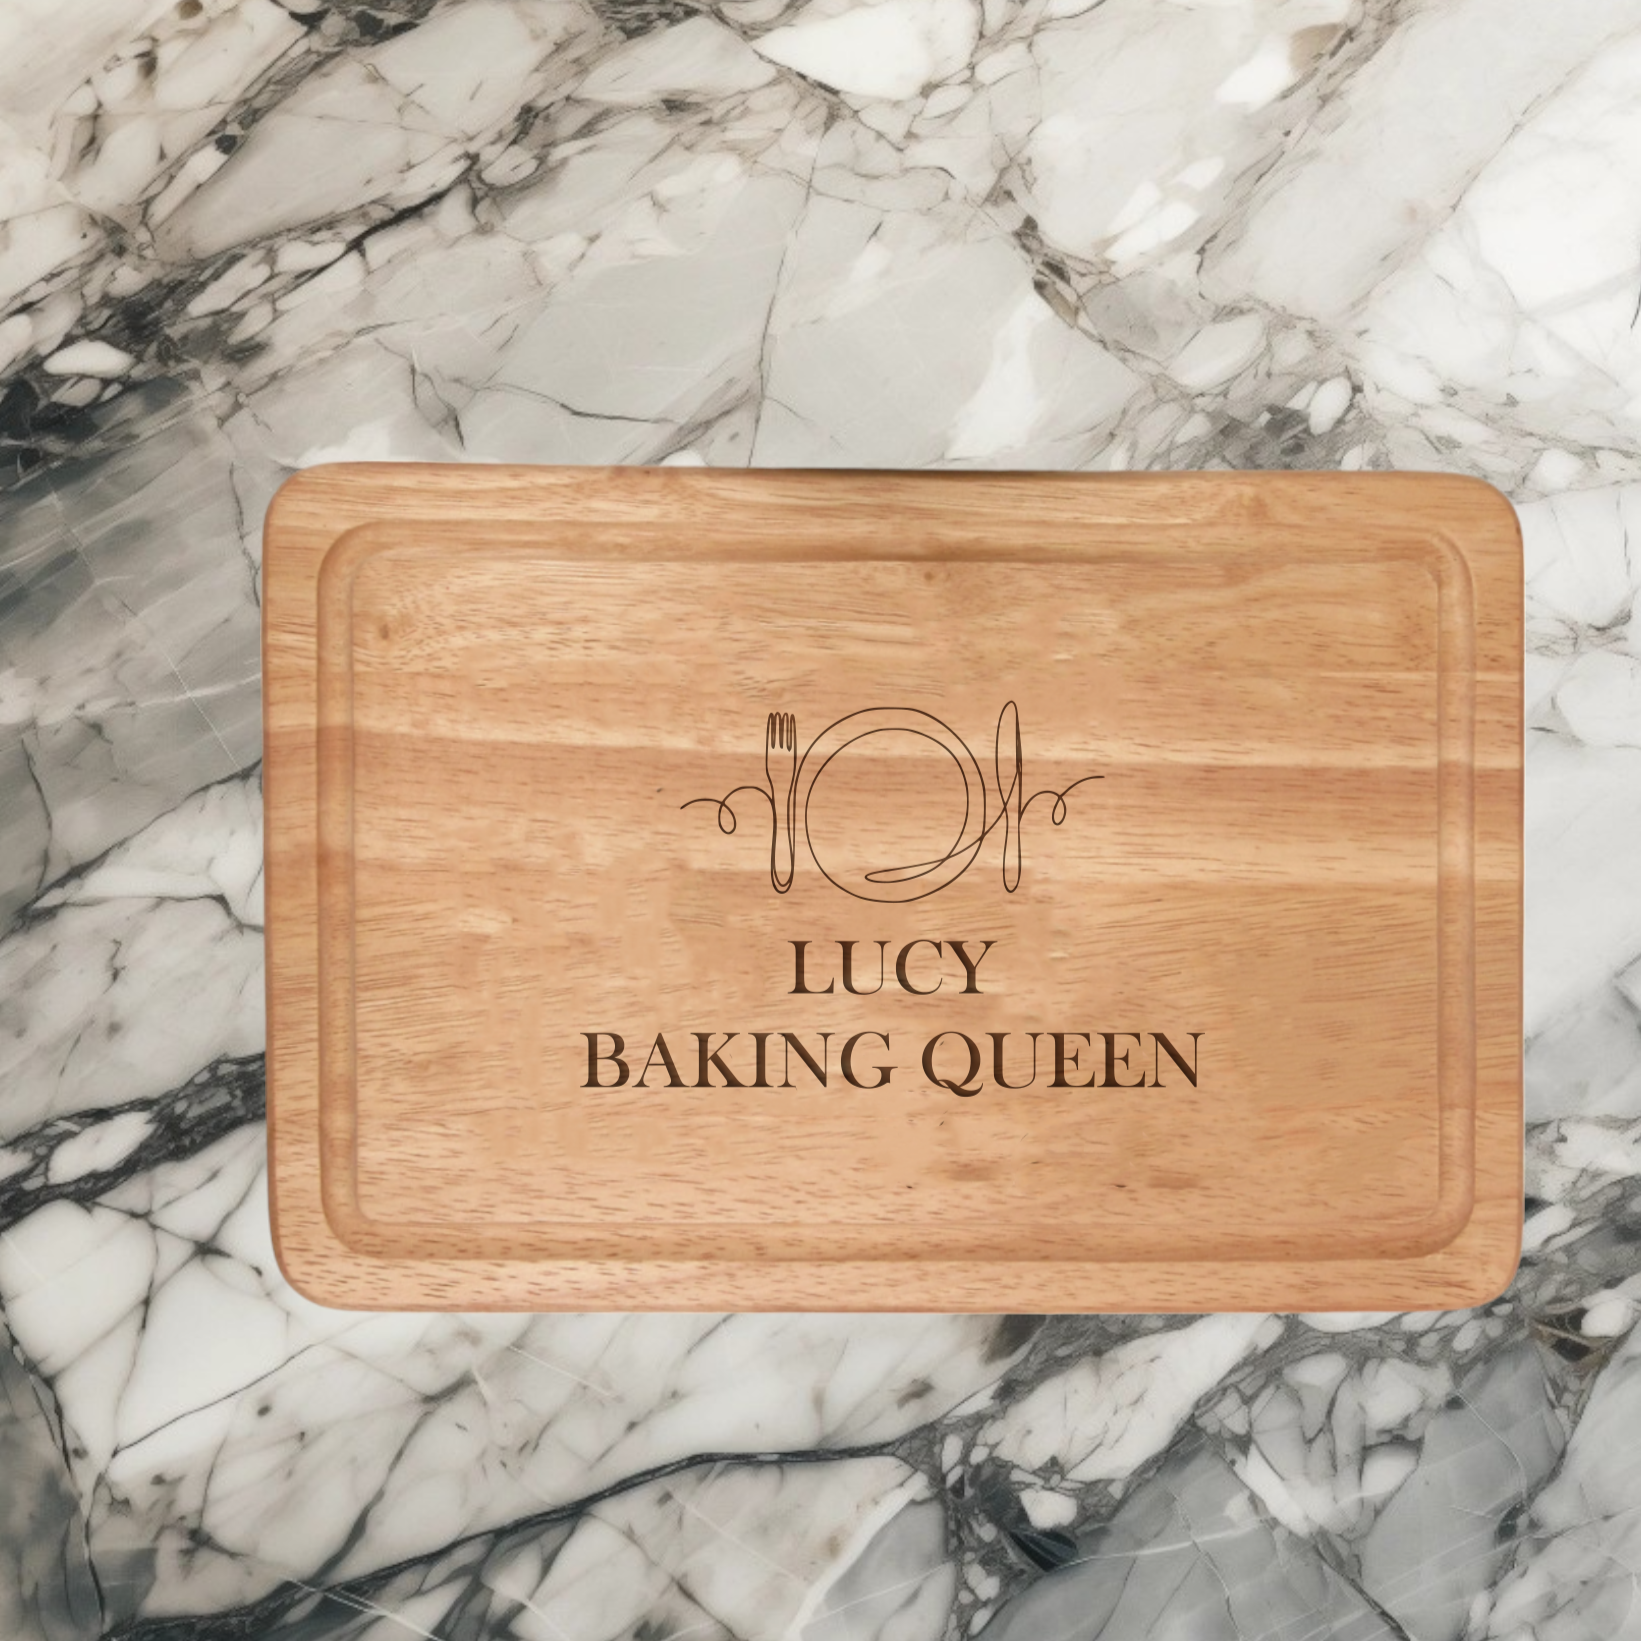 Upgrade your kitchen with our Personalised Chopping Board Knife & Fork Design, featuring 2 lines of text (max 20 characters each in caps) on a 300mmX200mm premium wood board. Ideal for gifting on occasions like housewarmings, weddings, or anniversaries, it combines personalized perfection with versatility and class. Enjoy a special culinary experience every time you use it. Care tip: Hand-wash only for long-lasting elegance.